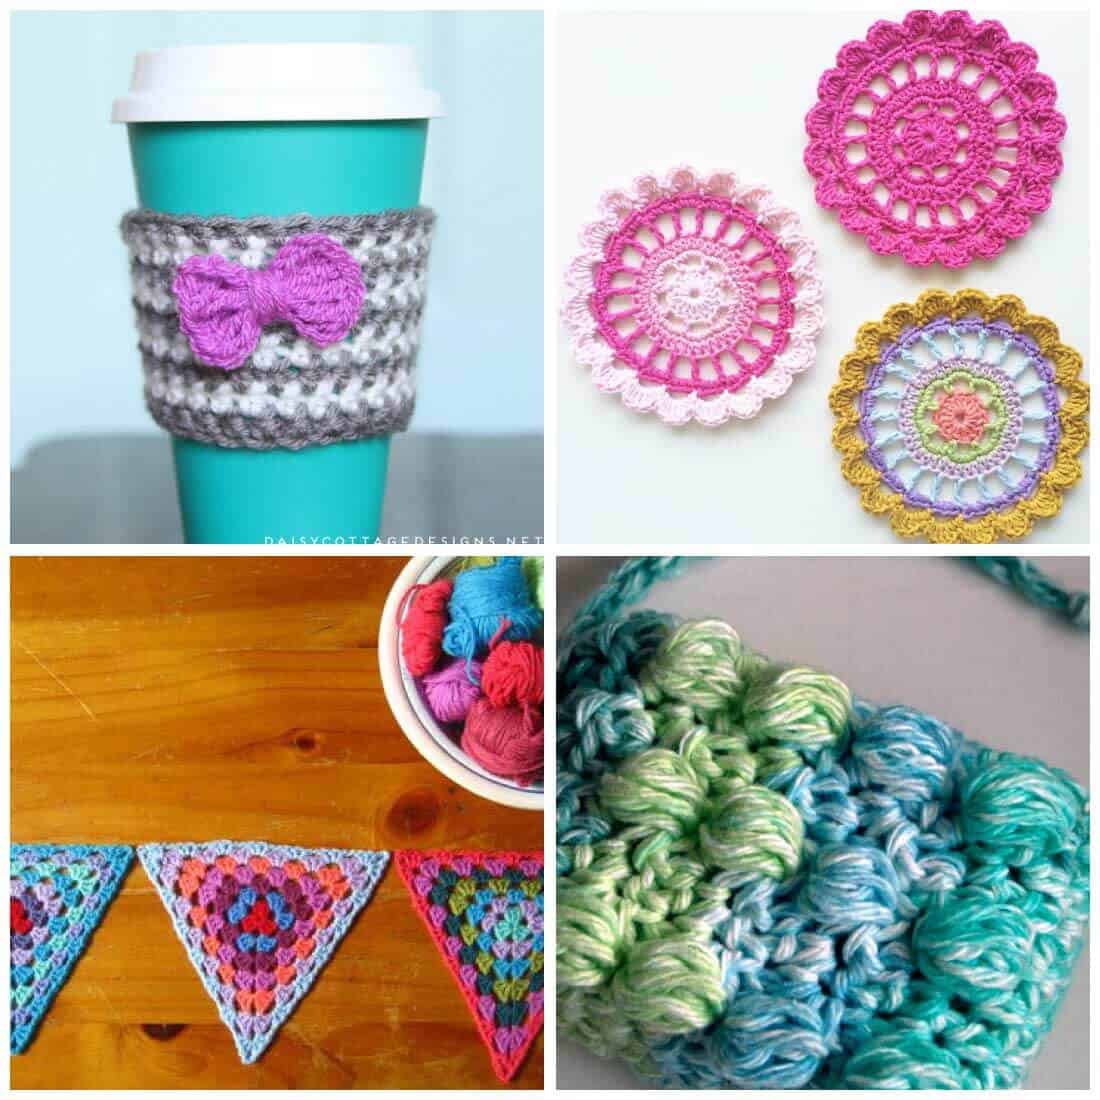 Easy Crochet Patterns Free Crochet Patterns On Daisy Cottage Designs,How To Blanch Almonds To Make Almond Flour